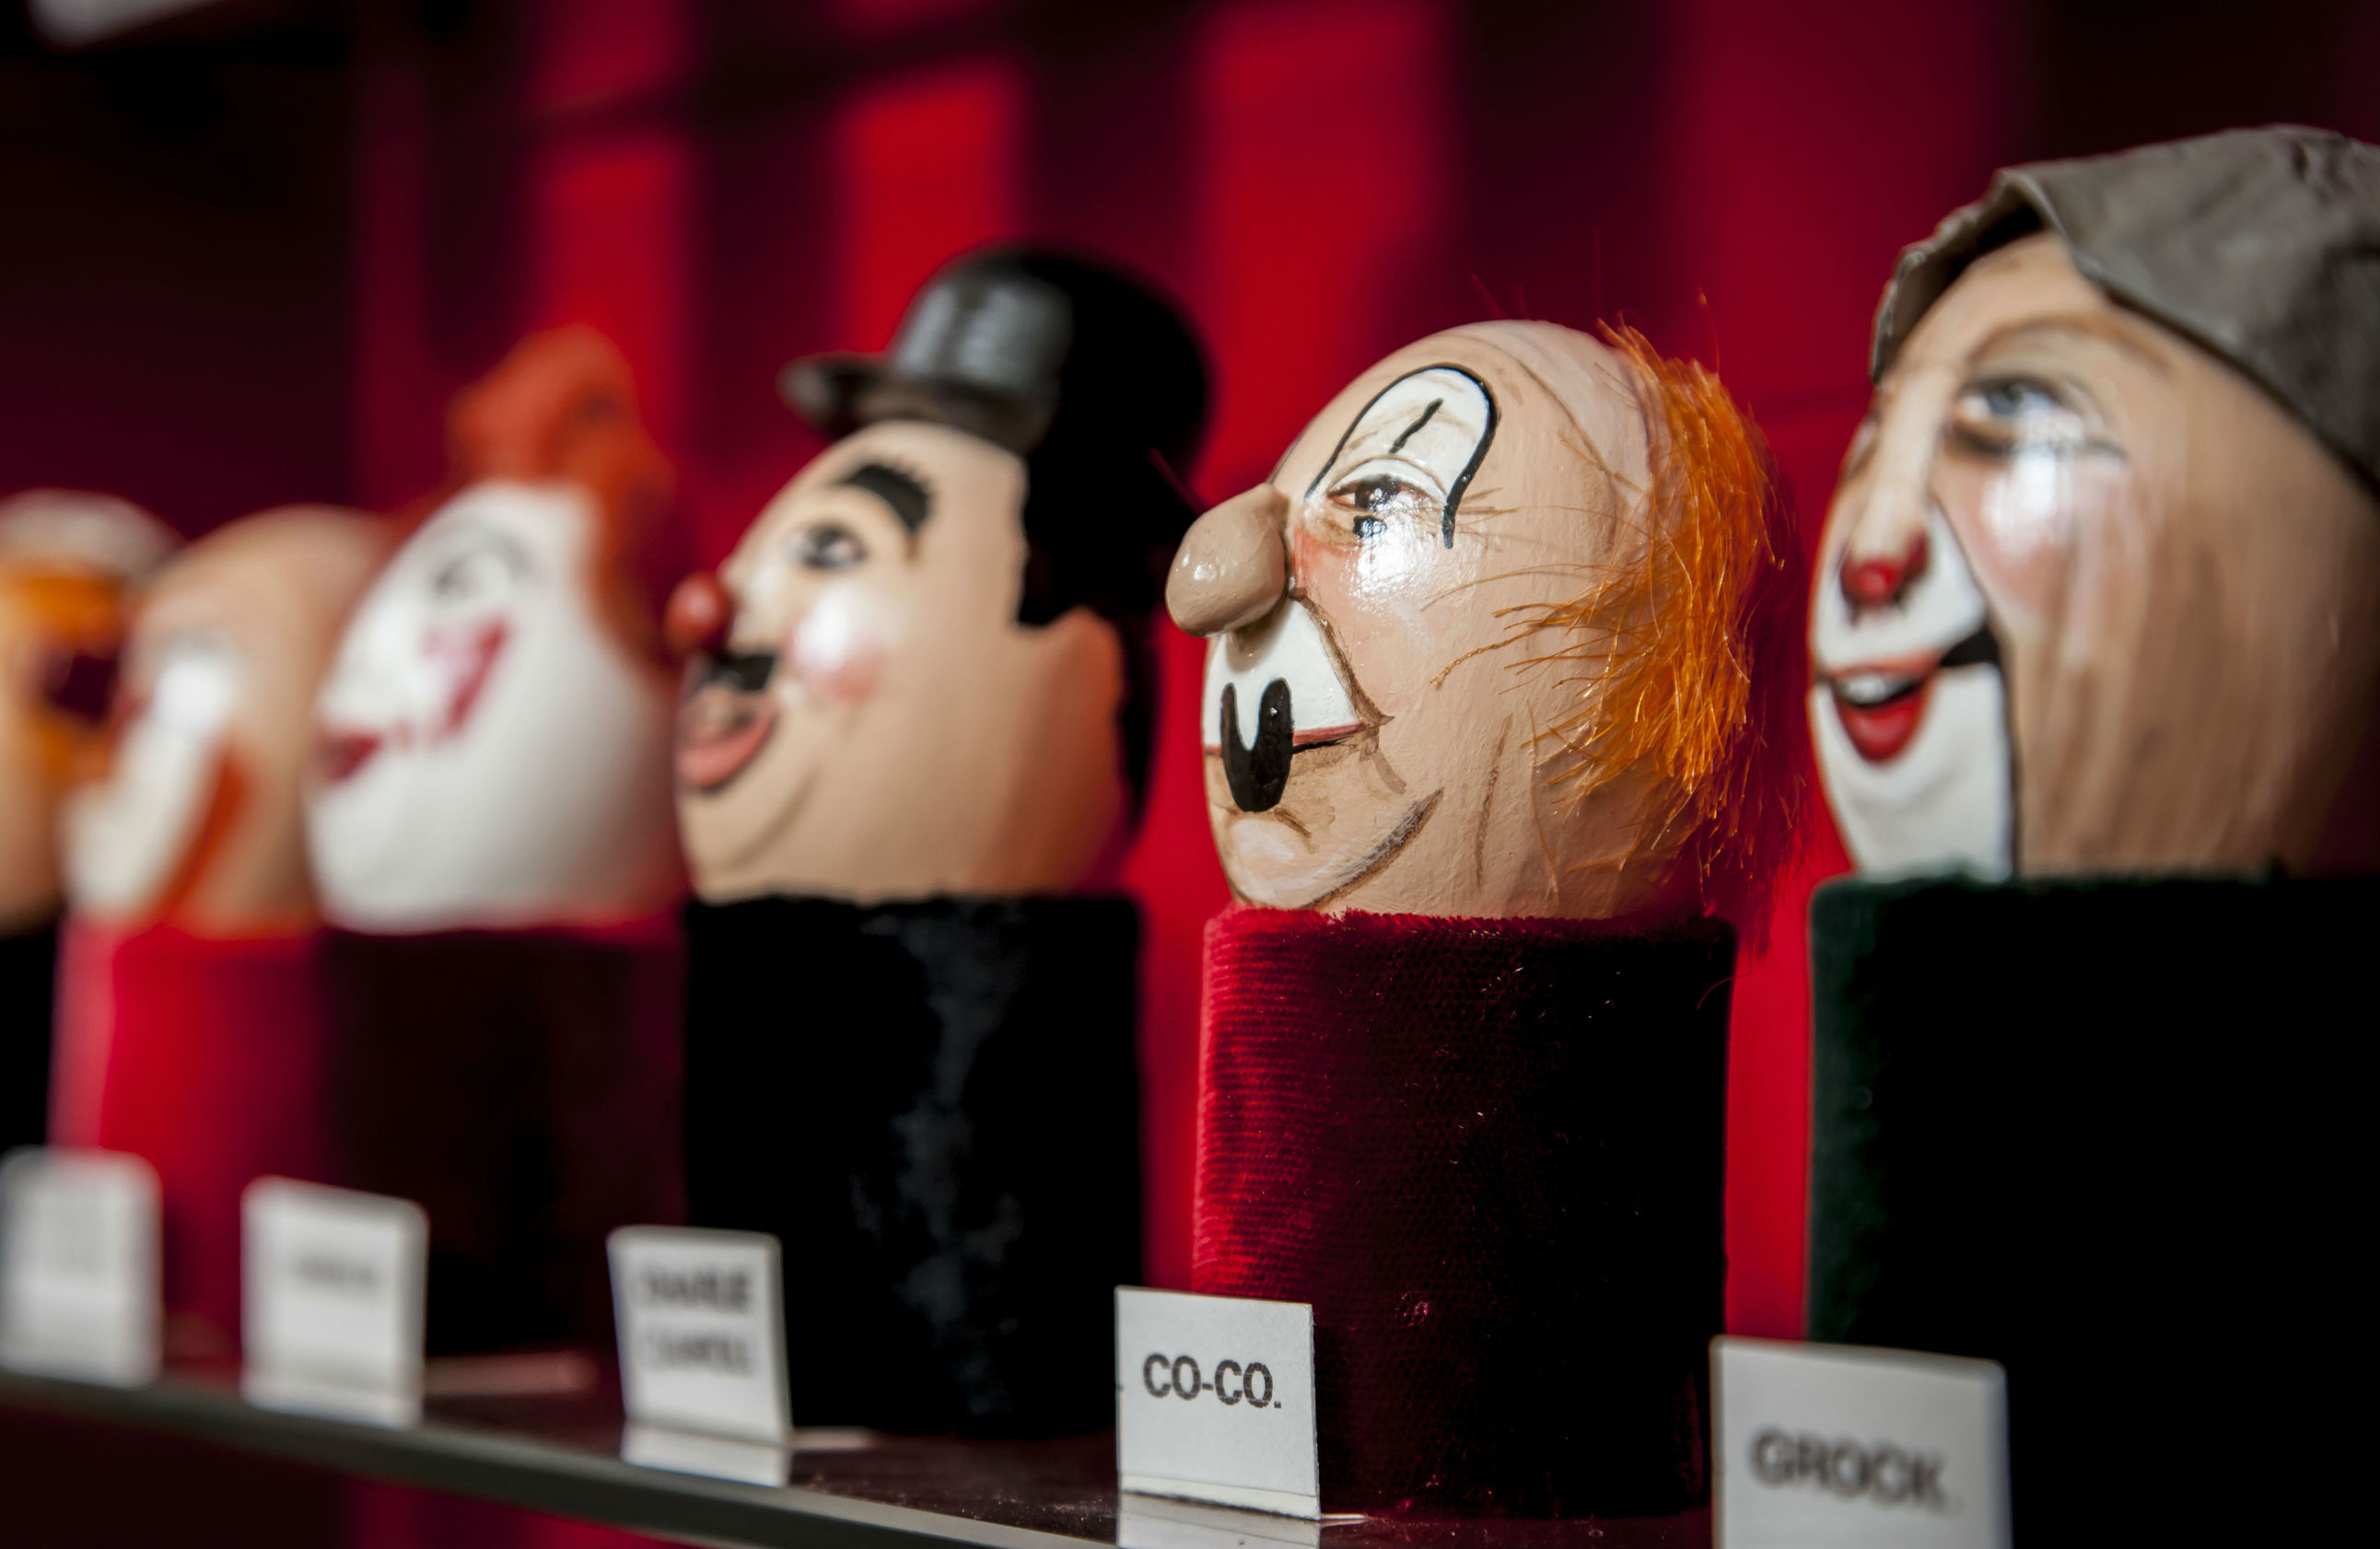 Clowns Gallery Museum - Visit London's most eccentric museums